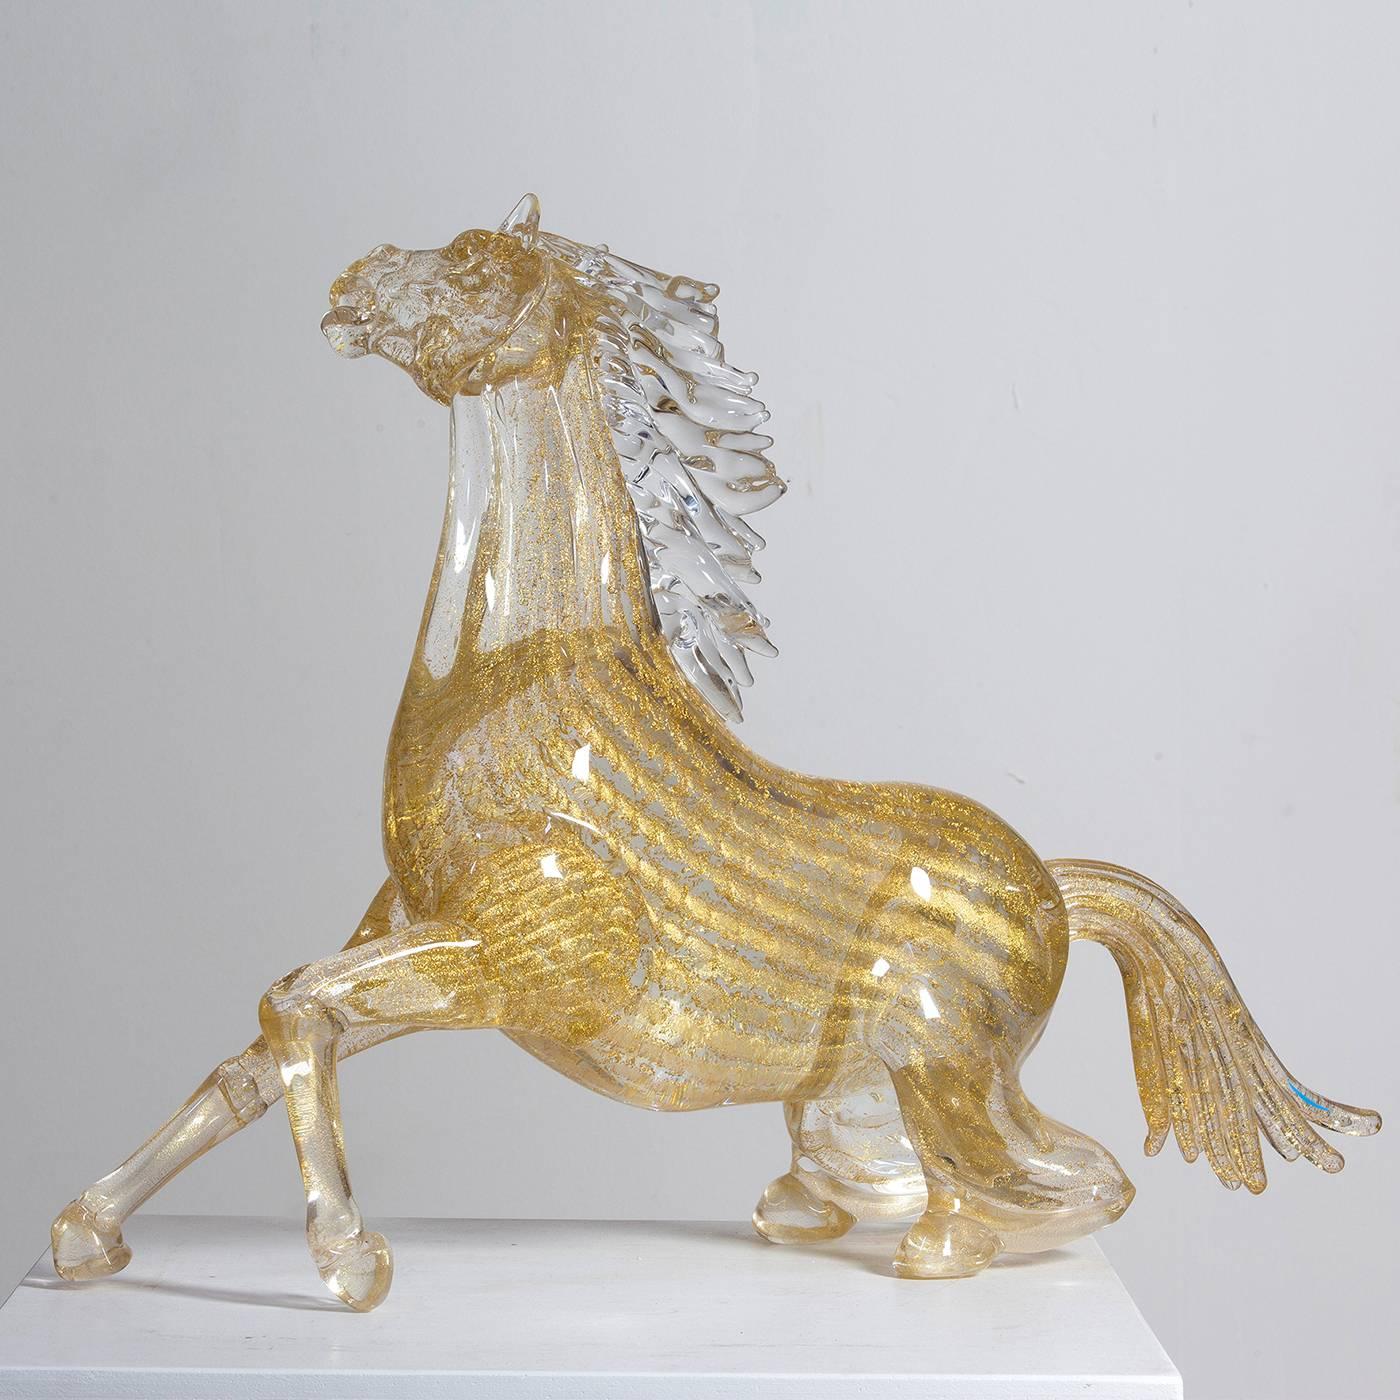 This exceptionally animated small sitting horse is entirely handmade by the master glass blower Zanetti on the island of Murano in Venice. The mane is clear while the body, tail and hooves have 24-karat gold leaf throughout. Make a dramatic